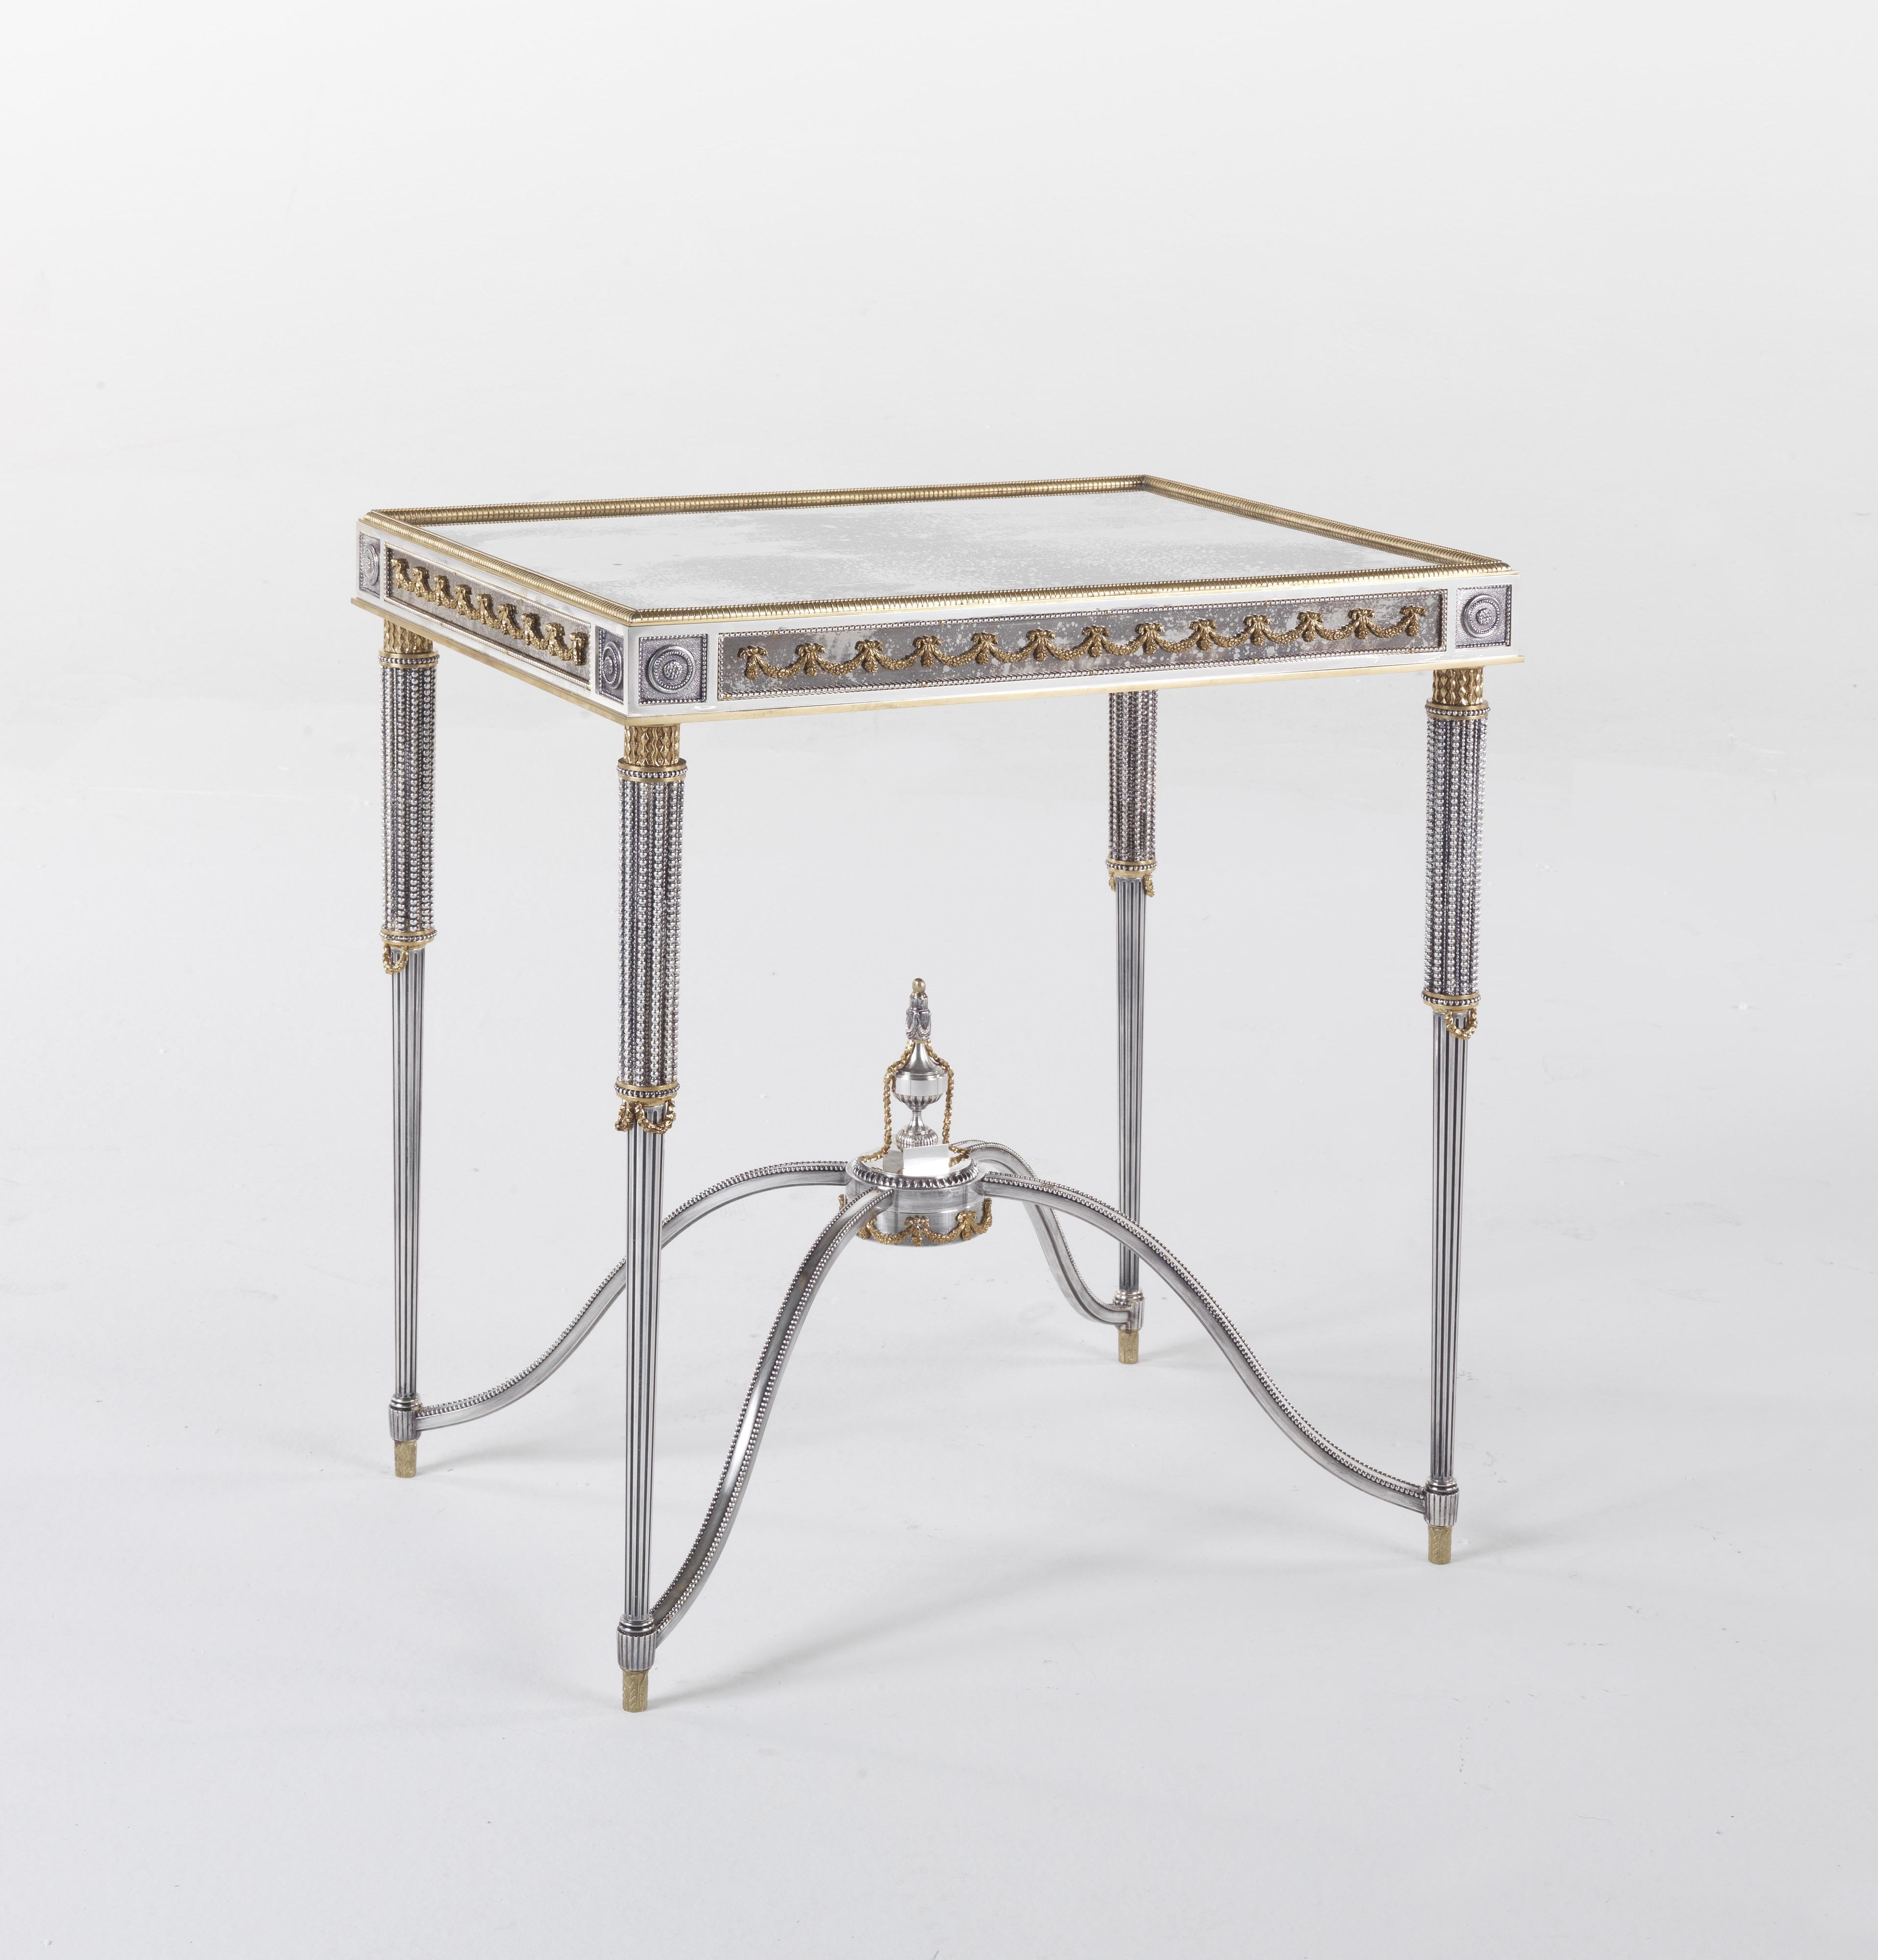 An elegant and luxurious baroque style for Eos coffee table. Characterized by a brass structure with decorative lost-wax cast elements finished in antiqued brass and silver, this coffee table is a precious piece of furniture, able to enhance